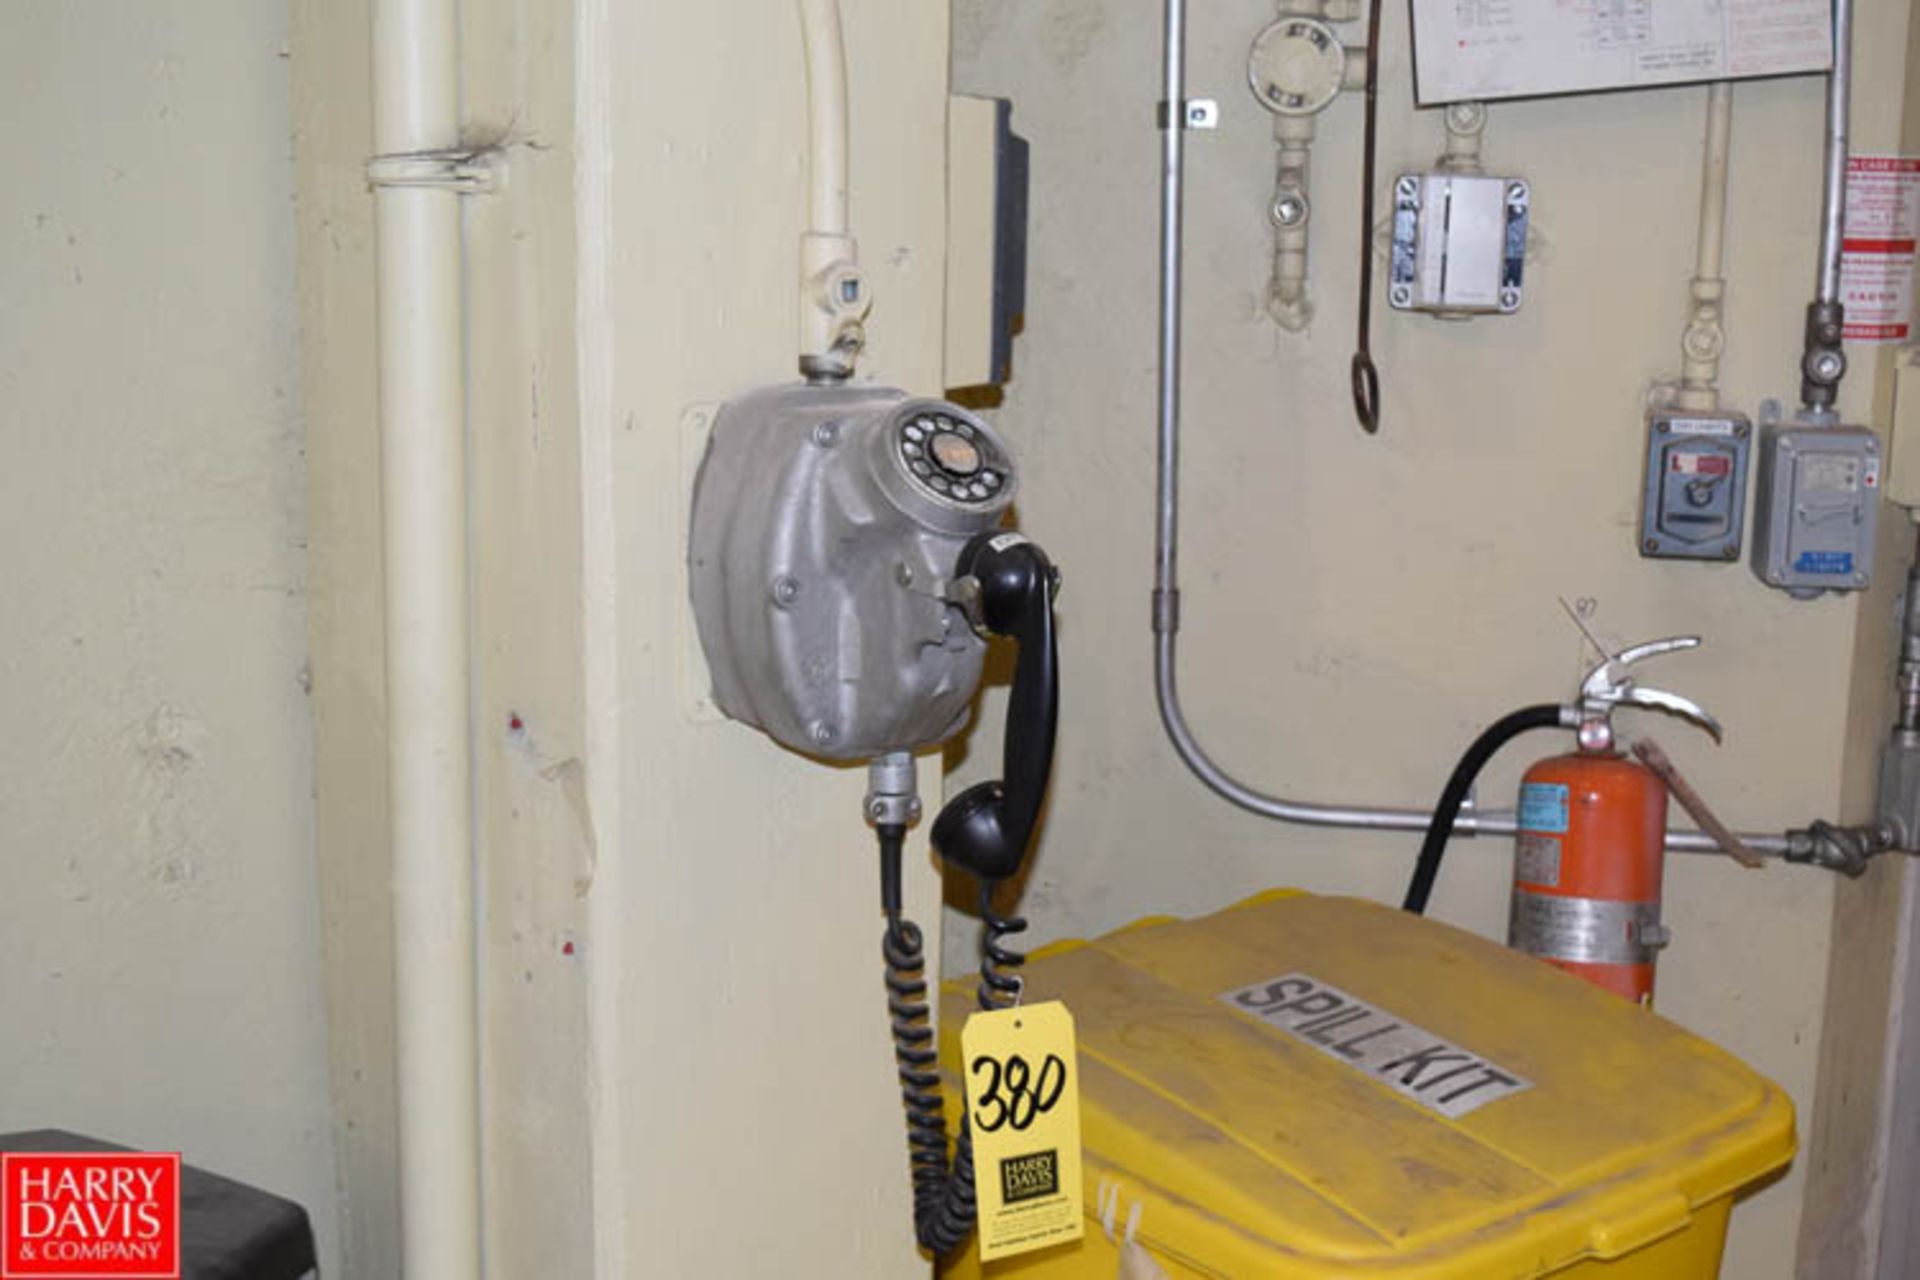 Explosion Proof Telephone - Rigging Fee $ 375